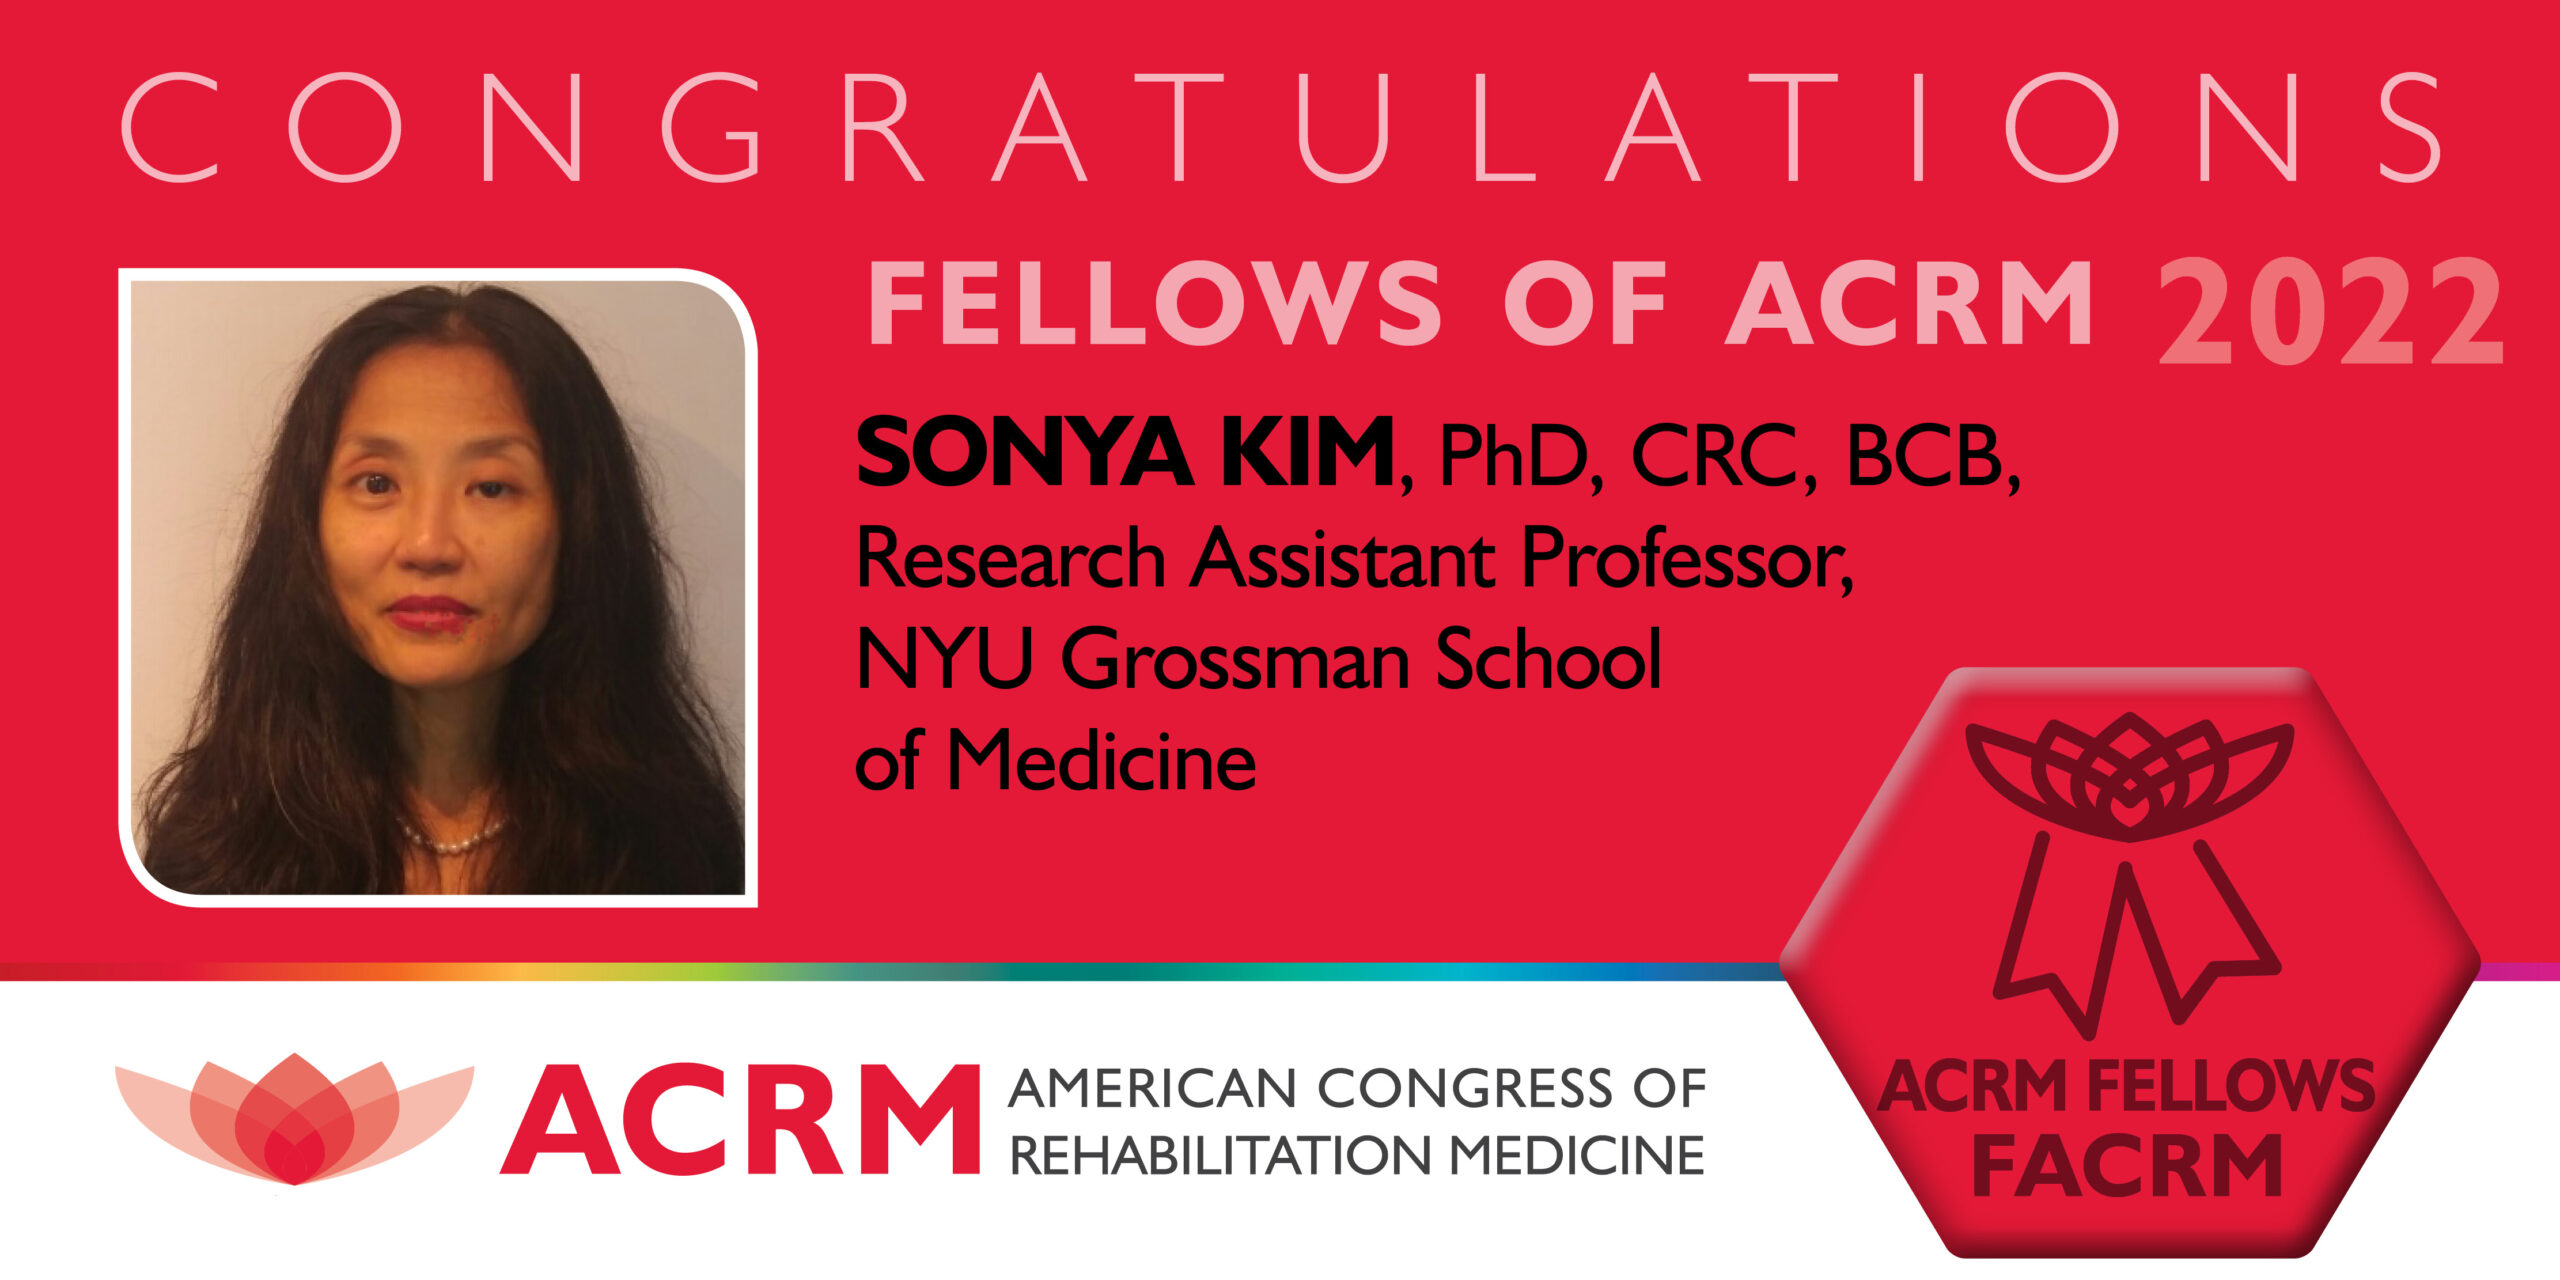 Dr. Sonya Kim is a 2022 Fellow of ACRM 